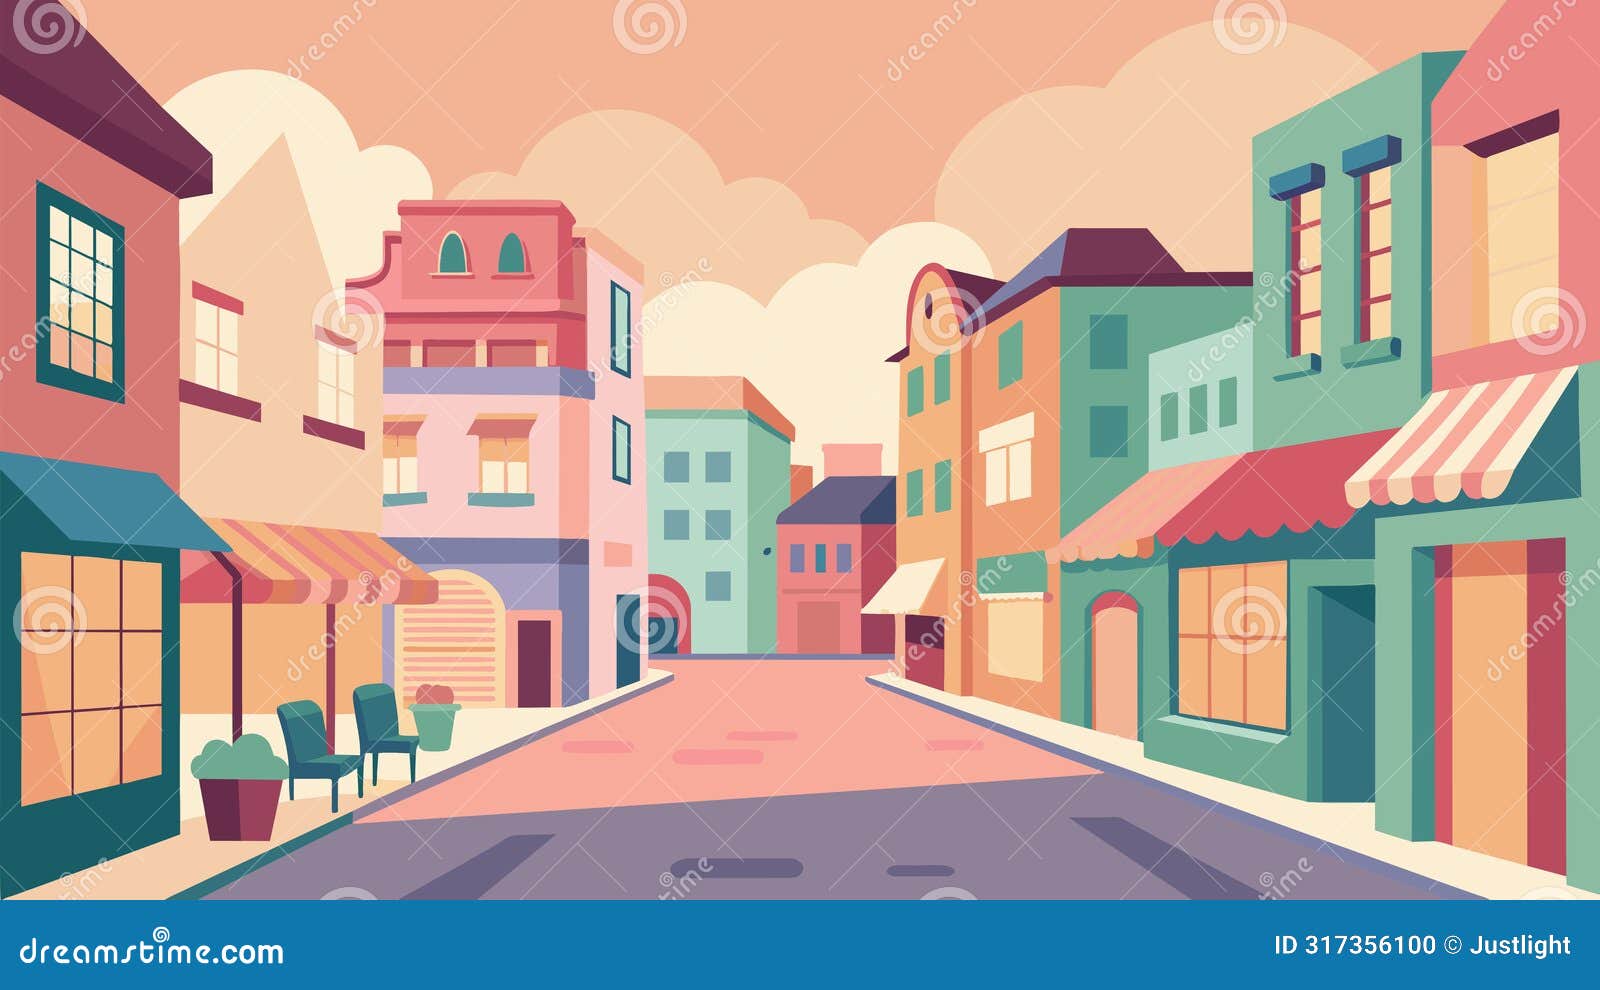 a charming street scene filled with pastelcolored buildings and storefronts bringing a sense of calm and warmth to the